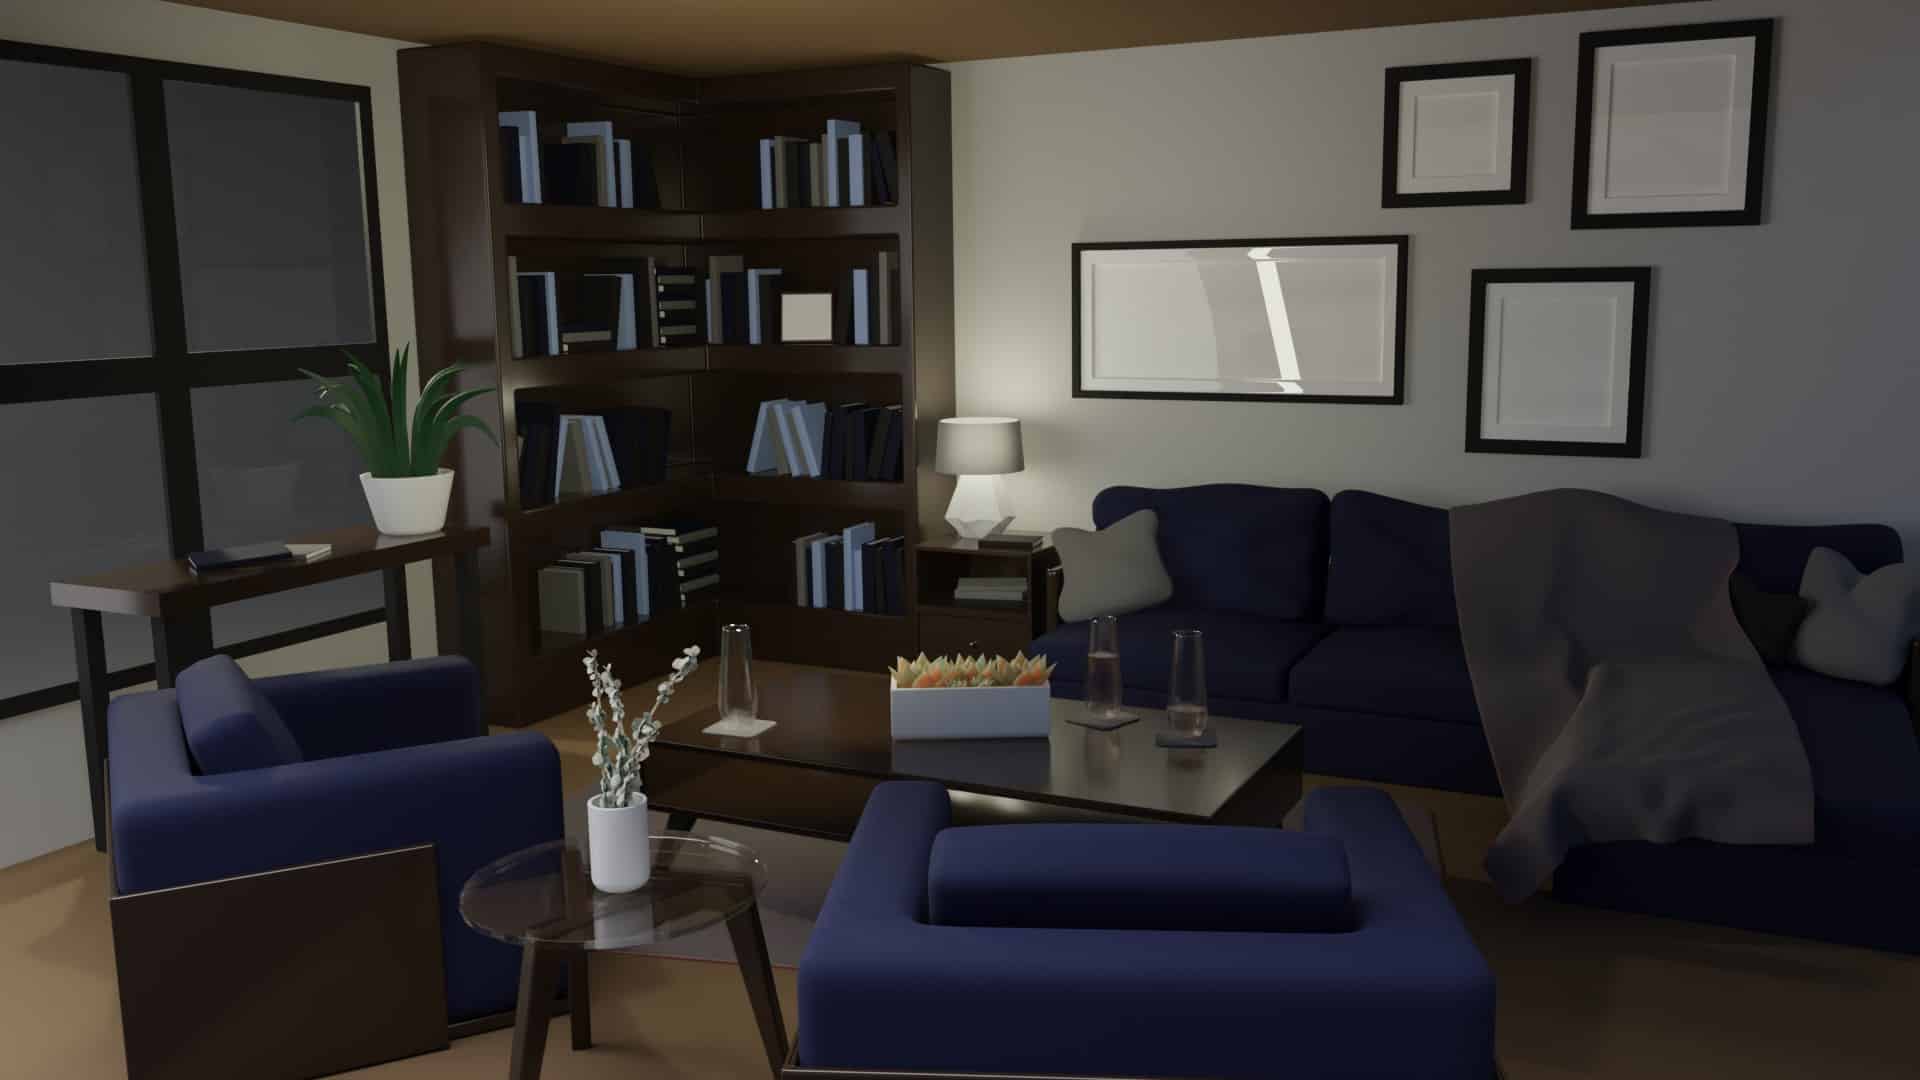 3D Video Assets: Living room created in 3D